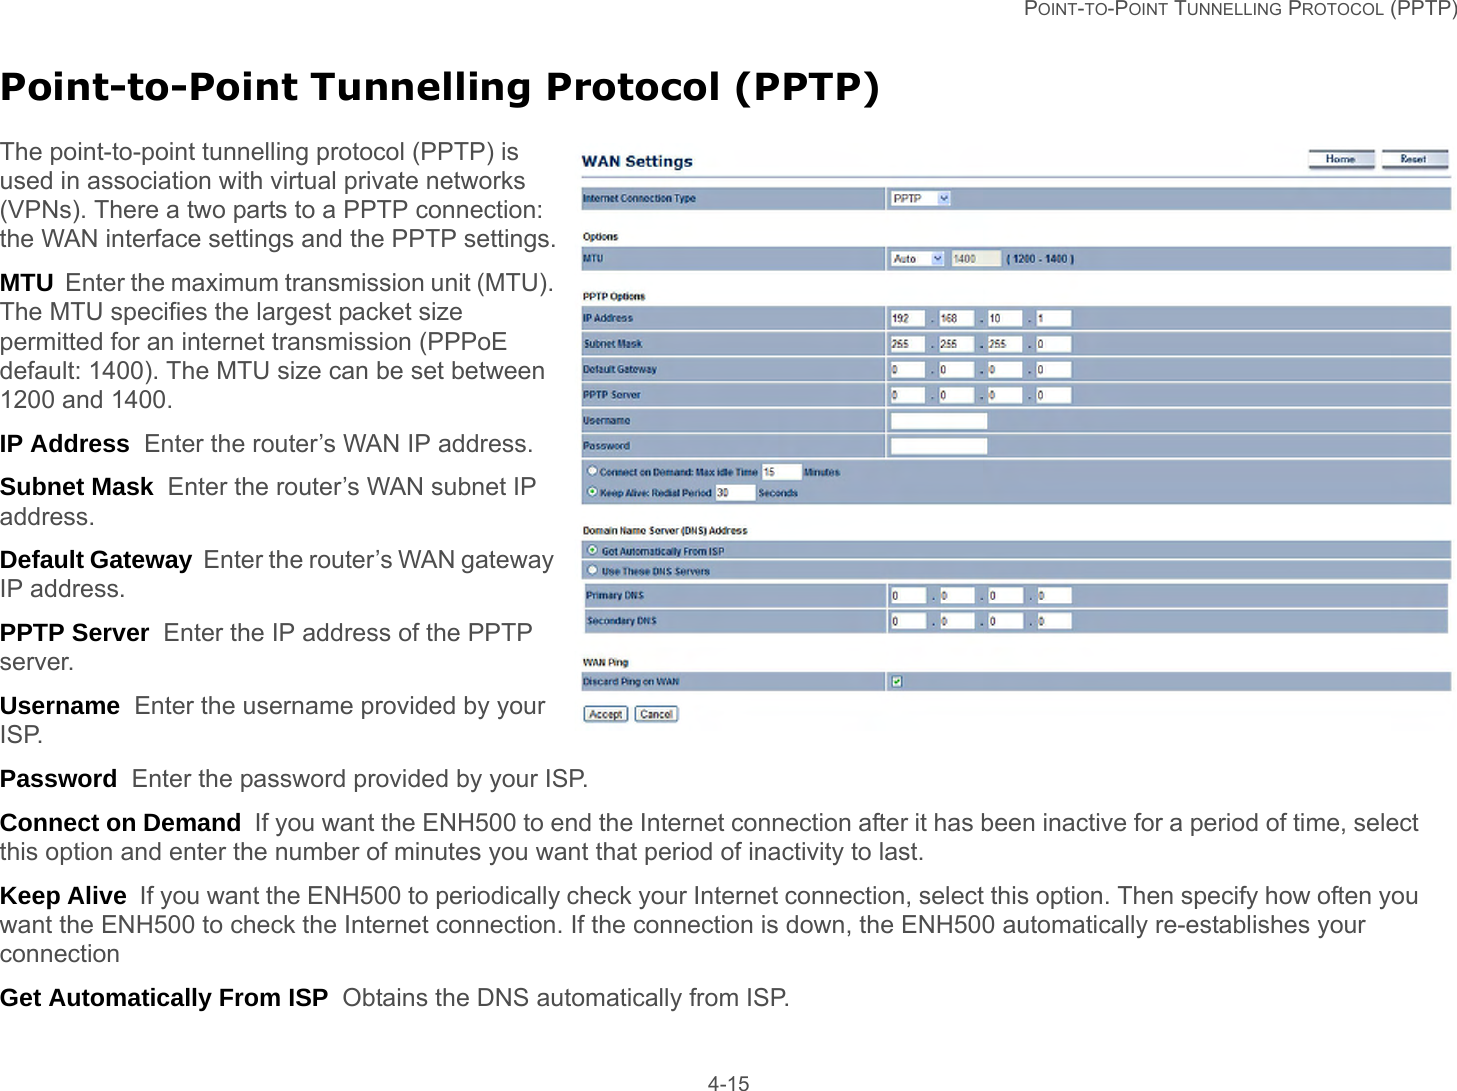   POINT-TO-POINT TUNNELLING PROTOCOL (PPTP) 4-15Point-to-Point Tunnelling Protocol (PPTP)The point-to-point tunnelling protocol (PPTP) is used in association with virtual private networks (VPNs). There a two parts to a PPTP connection: the WAN interface settings and the PPTP settings.MTU  Enter the maximum transmission unit (MTU). The MTU specifies the largest packet size permitted for an internet transmission (PPPoE default: 1400). The MTU size can be set between 1200 and 1400.IP Address  Enter the router’s WAN IP address.Subnet Mask  Enter the router’s WAN subnet IP address.Default Gateway  Enter the router’s WAN gateway IP address.PPTP Server  Enter the IP address of the PPTP server.Username  Enter the username provided by your ISP.Password  Enter the password provided by your ISP.Connect on Demand  If you want the ENH500 to end the Internet connection after it has been inactive for a period of time, select this option and enter the number of minutes you want that period of inactivity to last.Keep Alive  If you want the ENH500 to periodically check your Internet connection, select this option. Then specify how often you want the ENH500 to check the Internet connection. If the connection is down, the ENH500 automatically re-establishes your connectionGet Automatically From ISP  Obtains the DNS automatically from ISP.